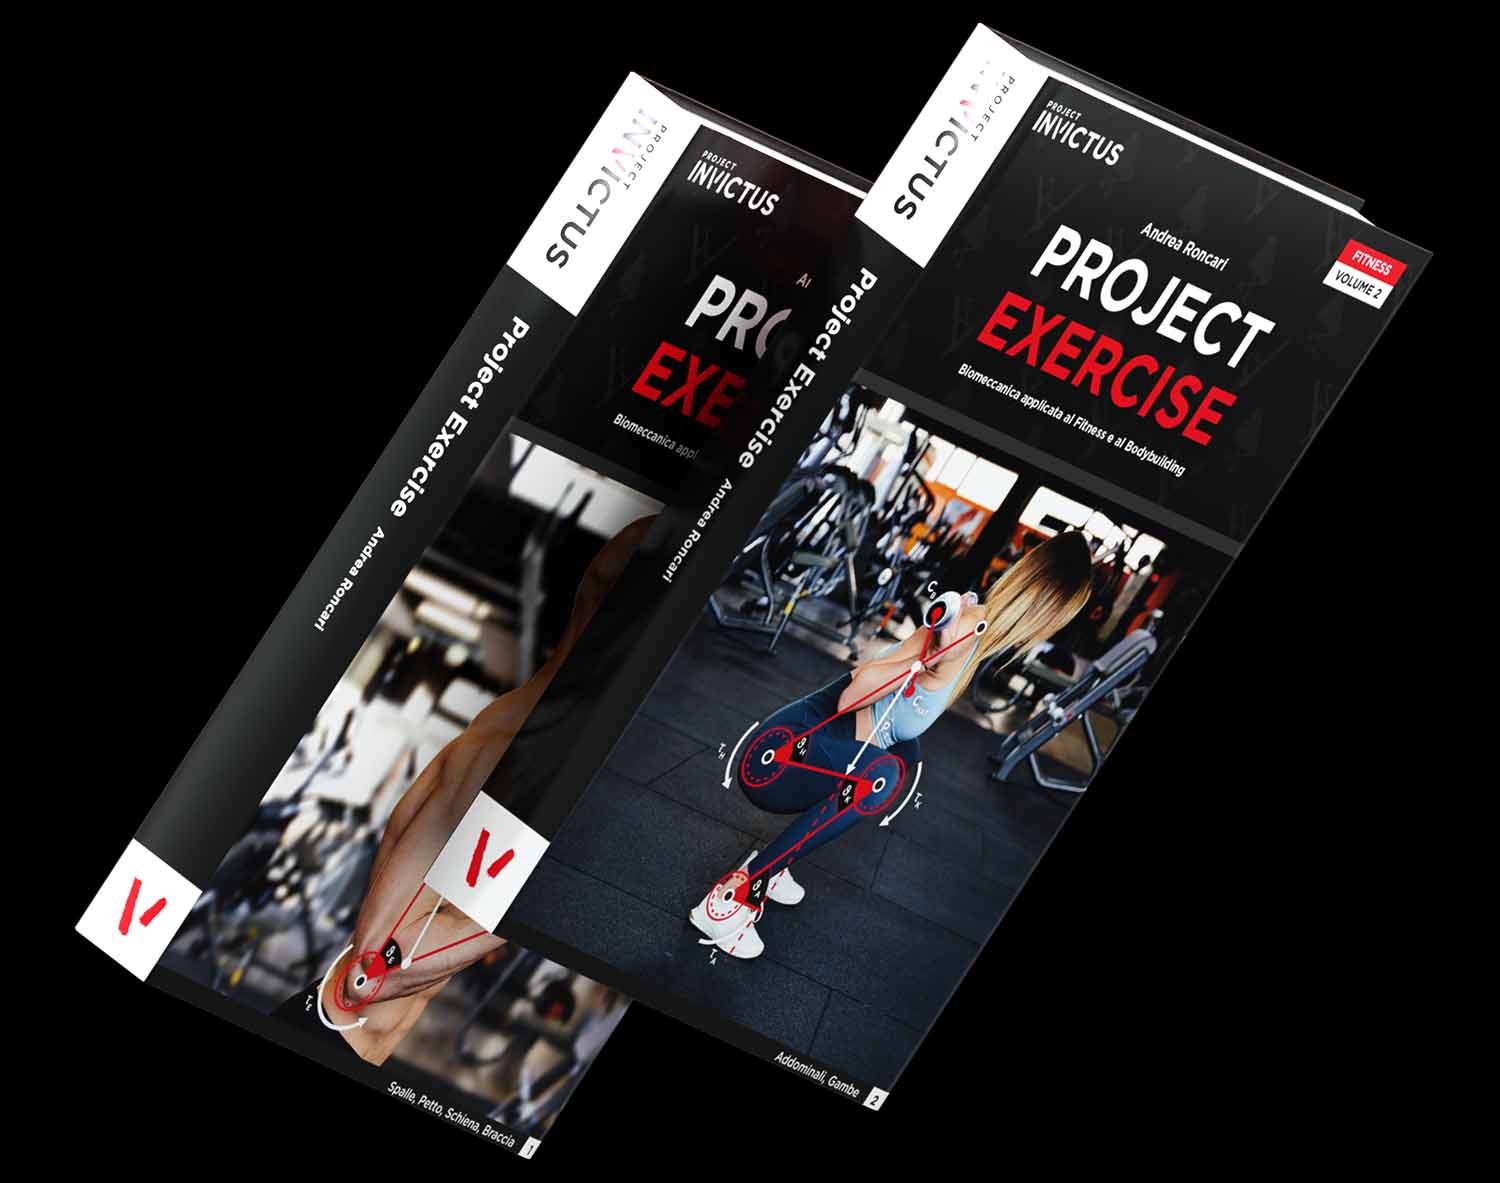 Project Exercise Vol1+2